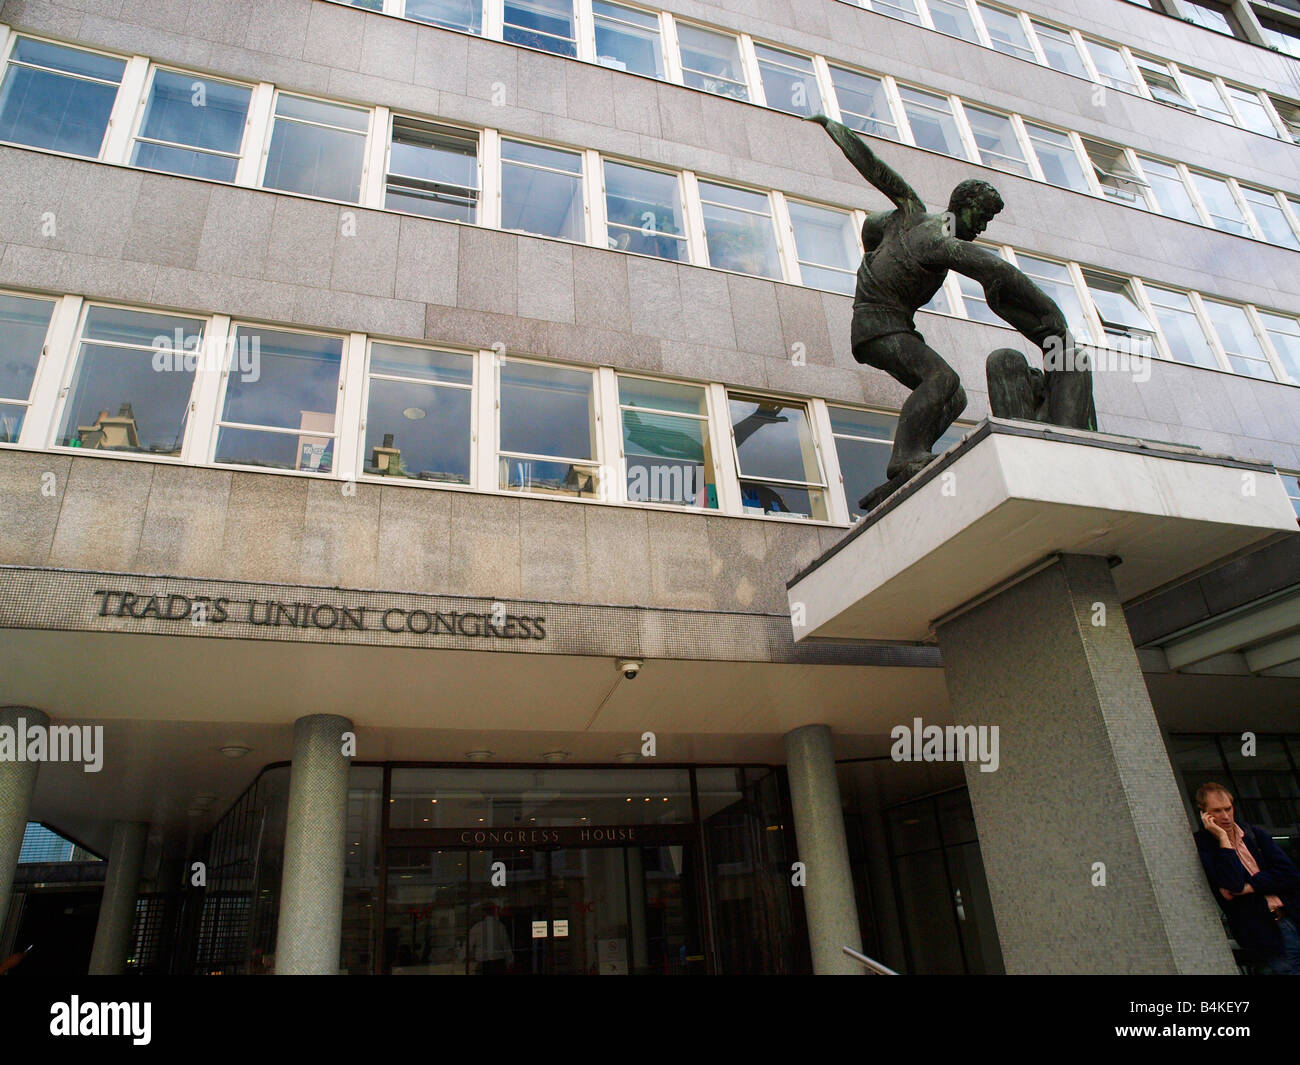 Trades Union headquarters building with bronze sculpture by Bernard Meadows representing the spirit of trade unionism. Stock Photo